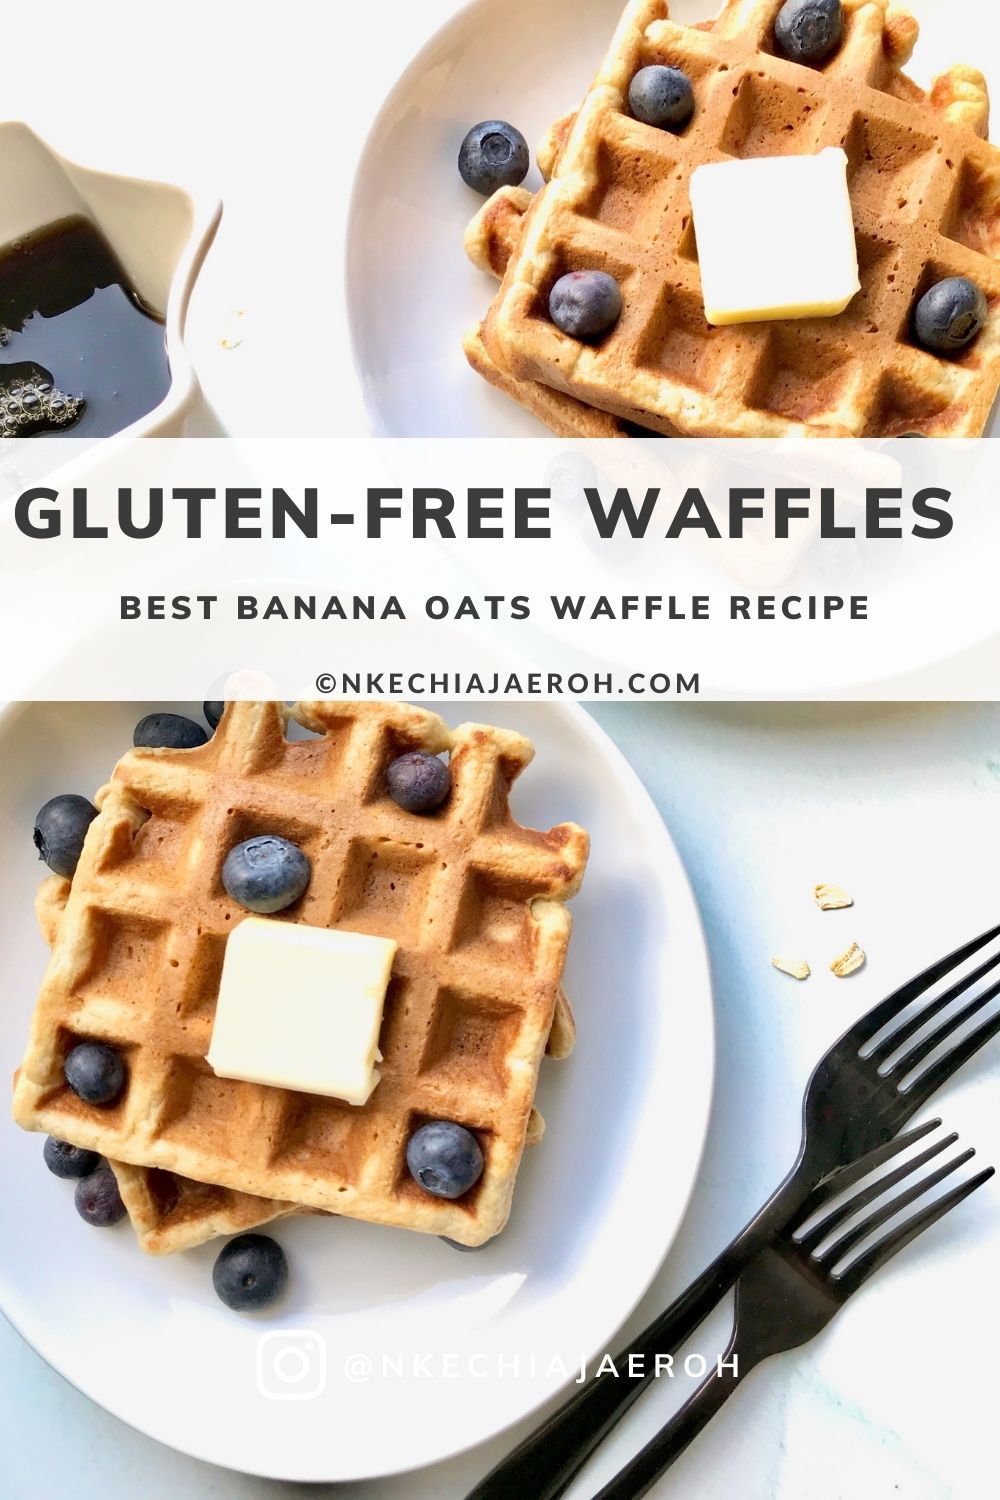 These healthy banana oat waffles are gluten-free, nut-free, fluffy, and the sweetest gluten-free waffles you will ever make! If you have some overripe bananas and old-fashioned oats, let's make some sweet banana oatmeal waffles. If you like bananas and oats separately, you would like even these banana oat waffles the more! These waffles are gluten-free and freezer-friendly.  #waffles #bananawaffles #glutenfreewaffles #healthywaffles #freezermeals #oatmealwaffles